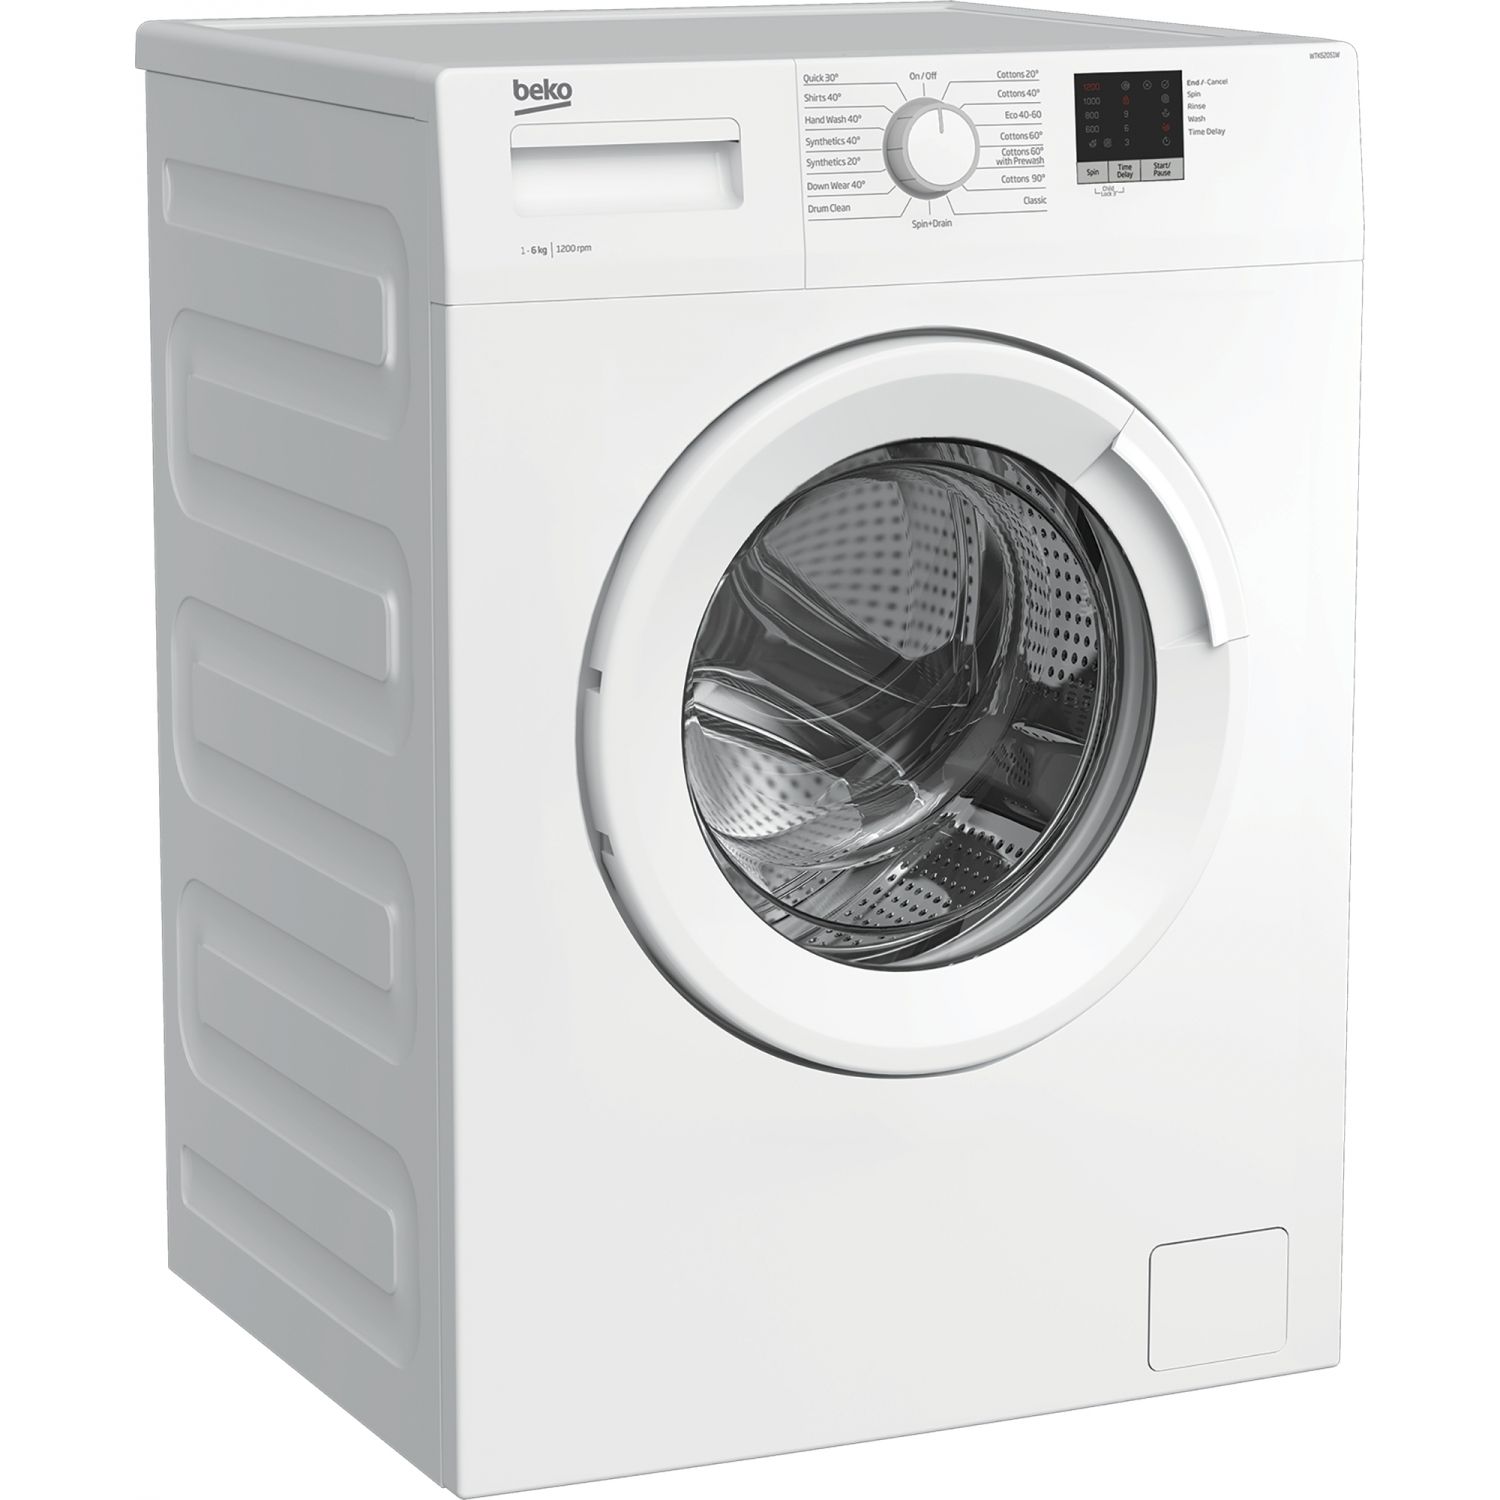 Beko WTK62051W 6Kg Washing Machine with 1200 rpm - White - A+++ Rated - 2